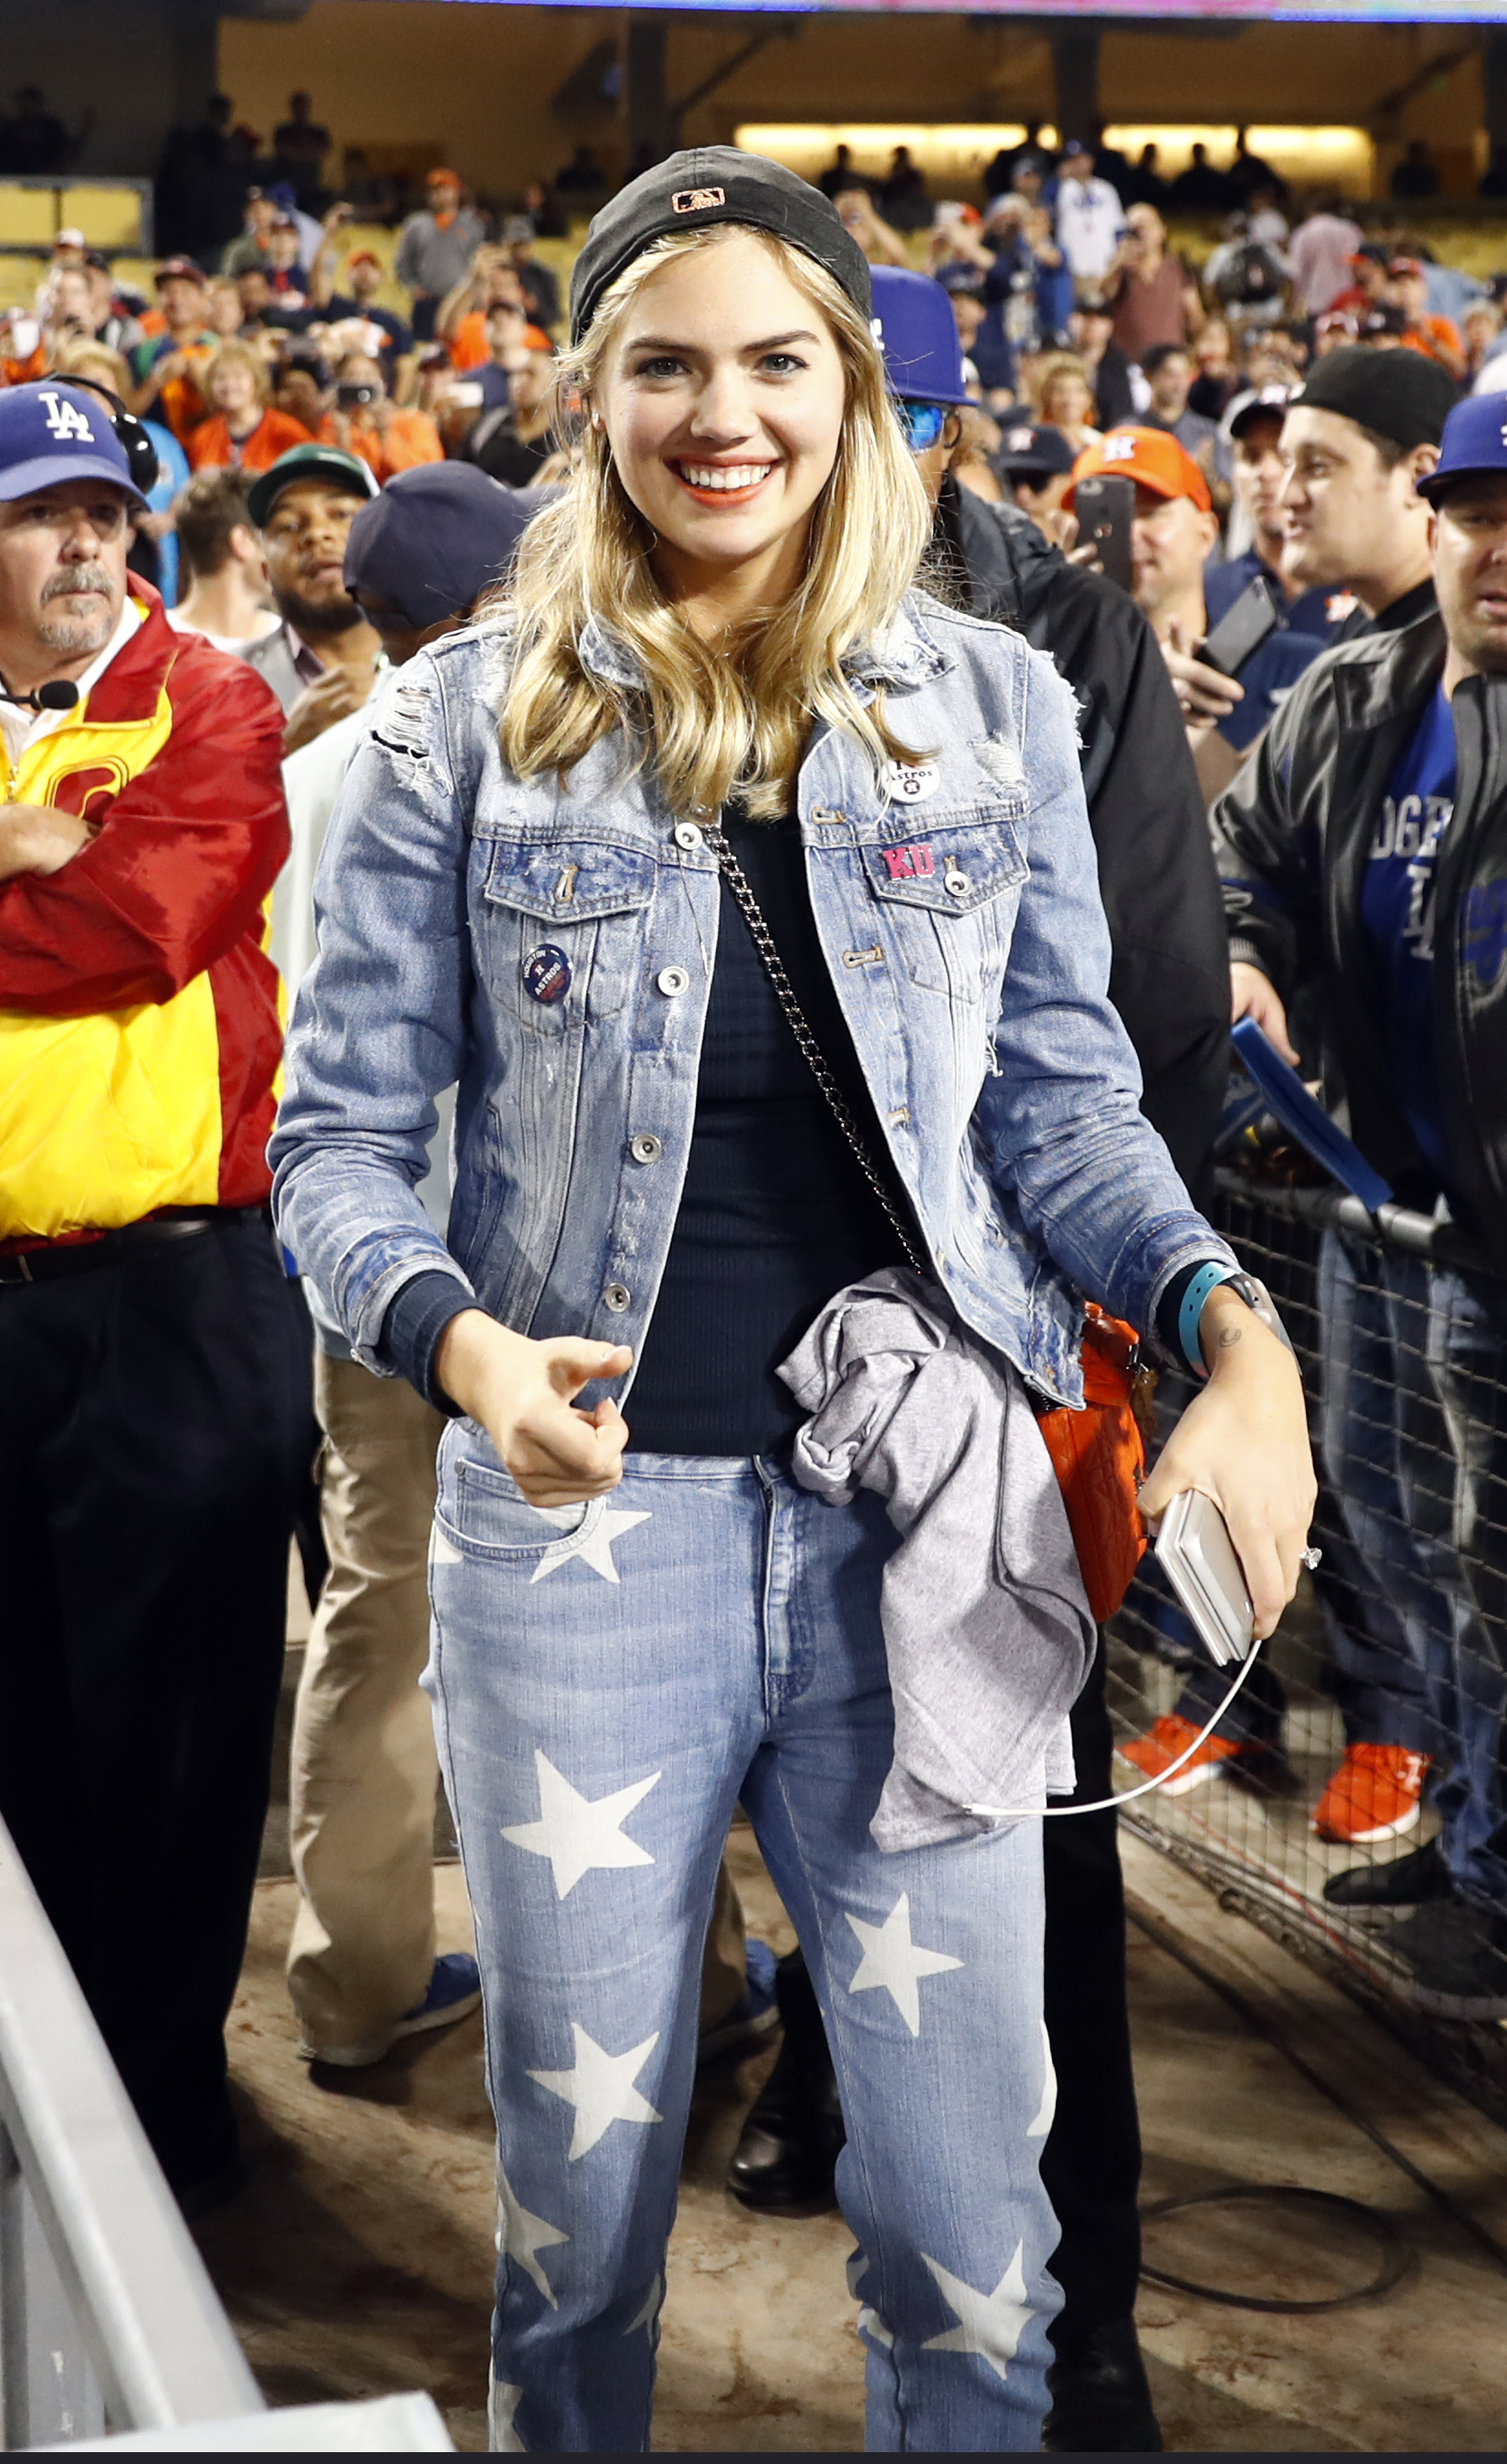 What to wear to a baseball game: kate upton style